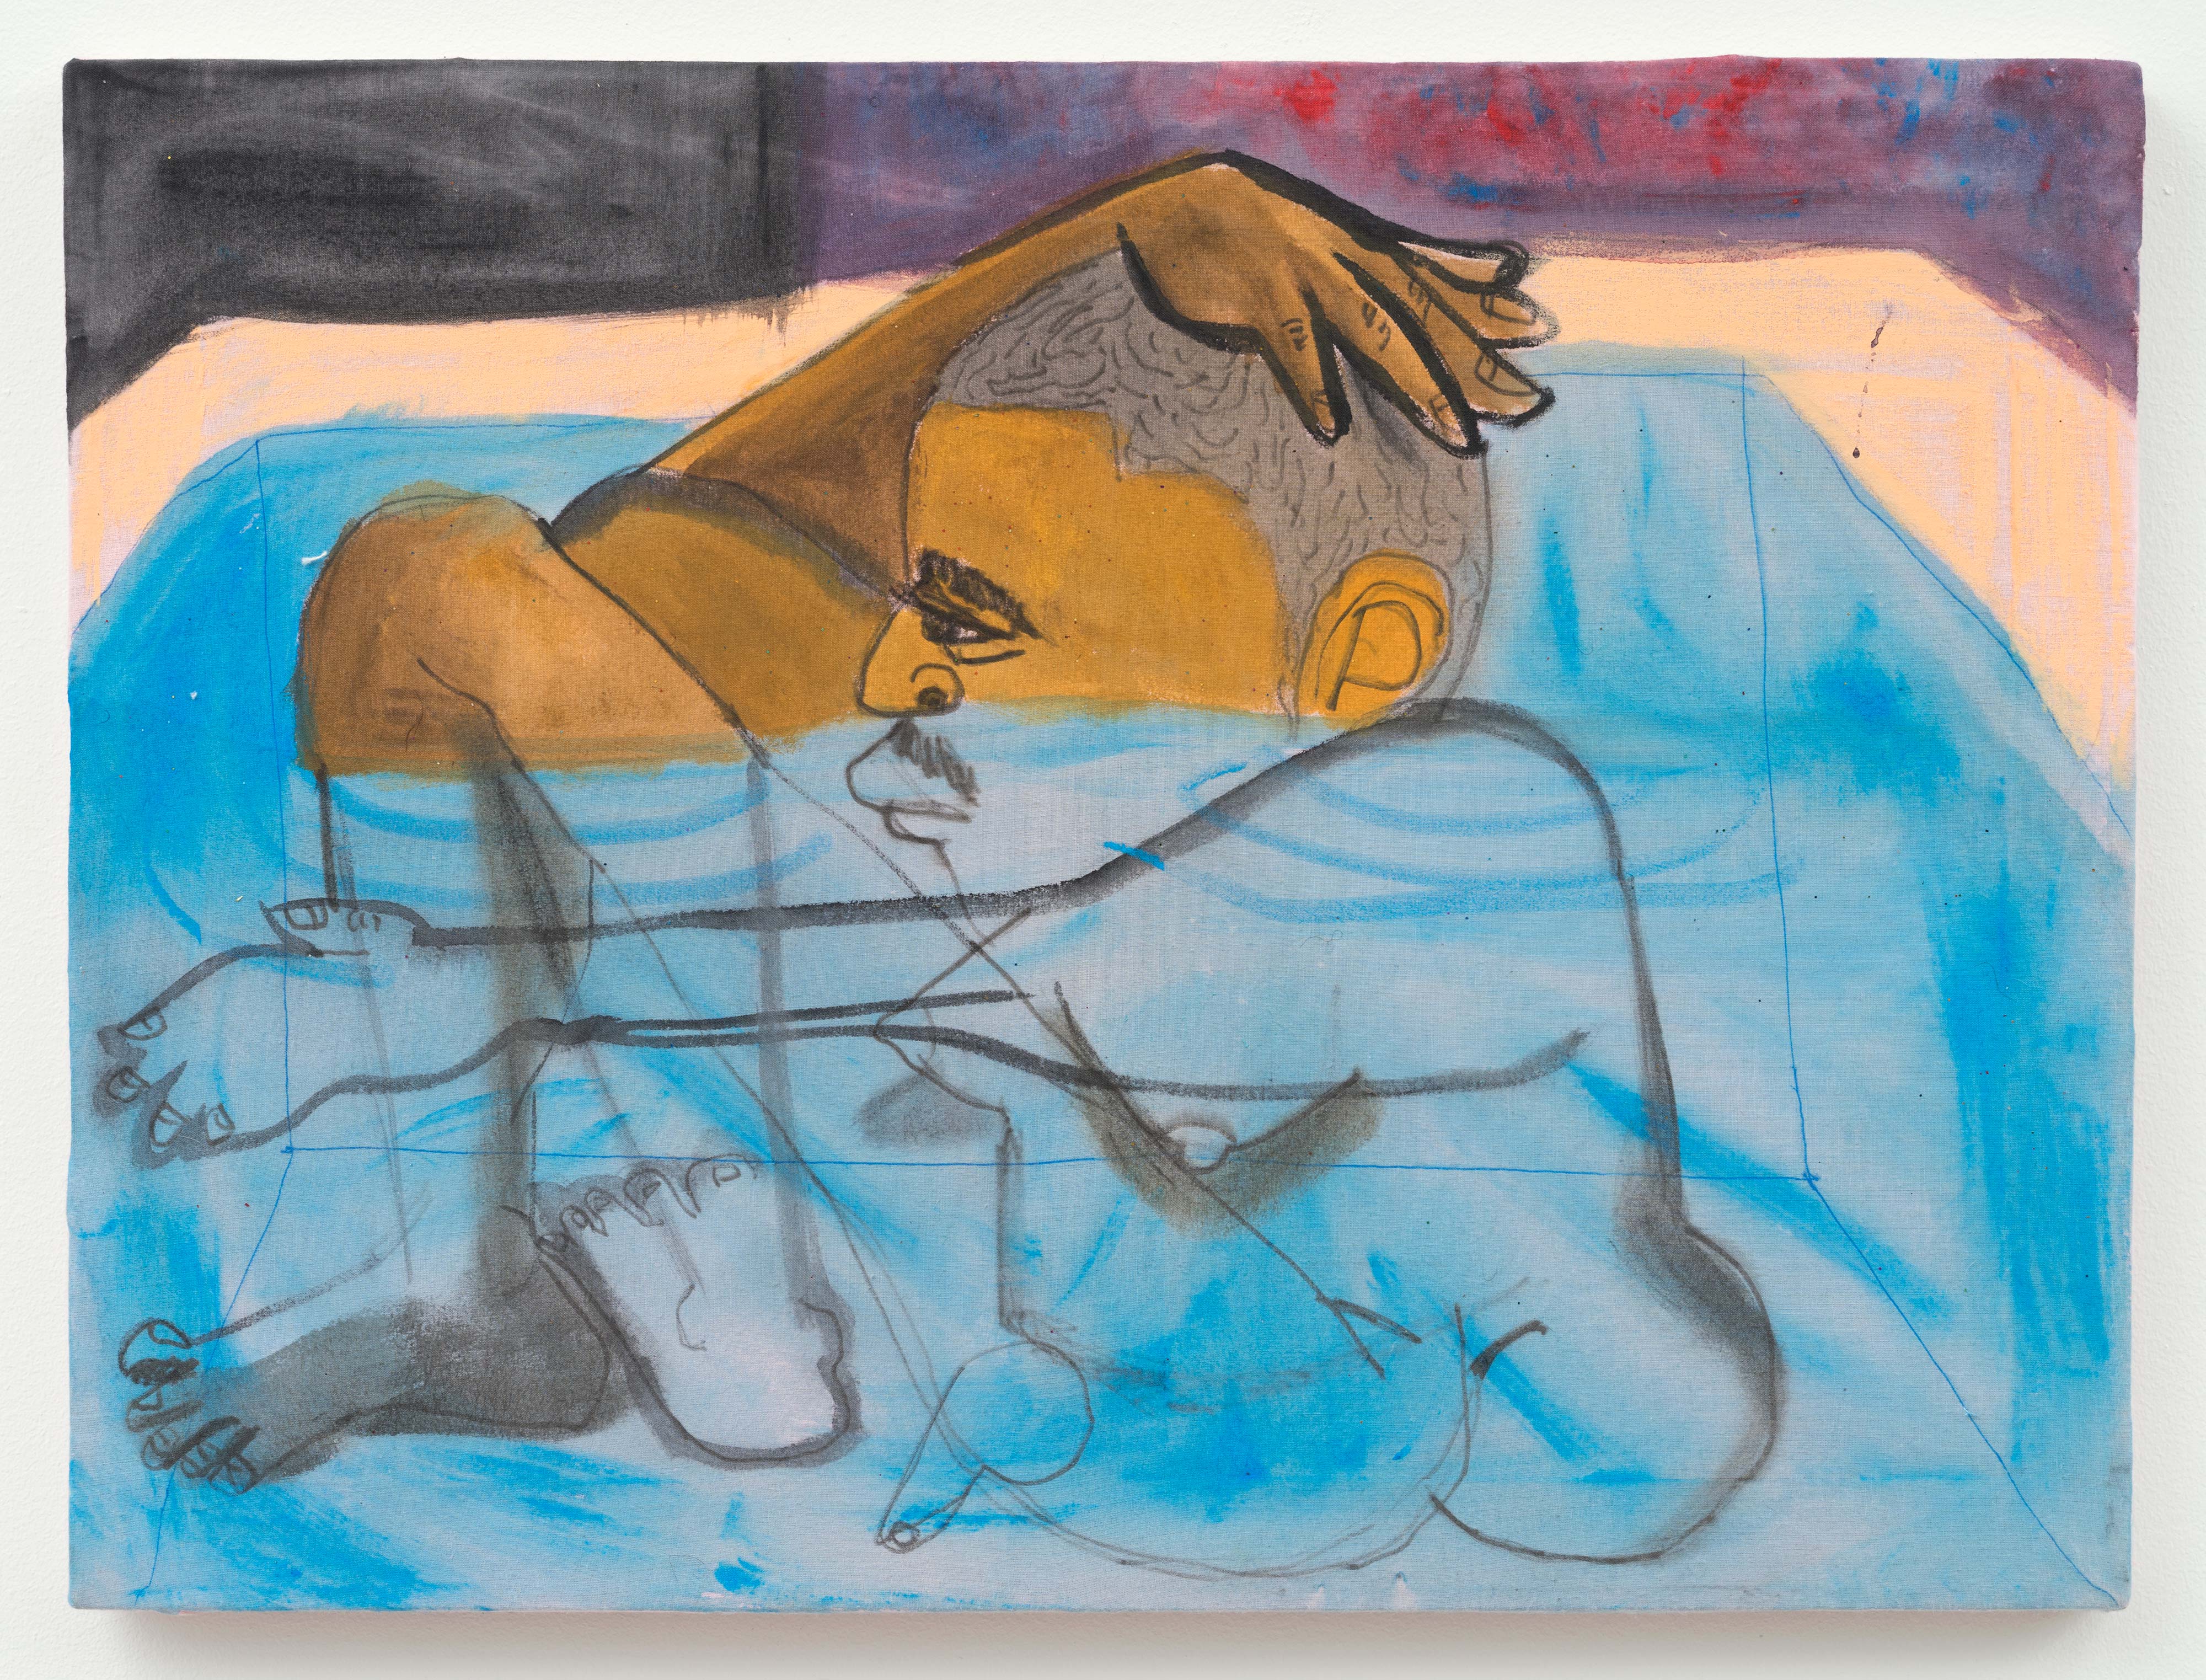 Jonathan Lyndon Chase<br>Man in Tub<br>2016<br>Oil on canvas<br>17 x 25 in (43.2 x 63.5 cm)